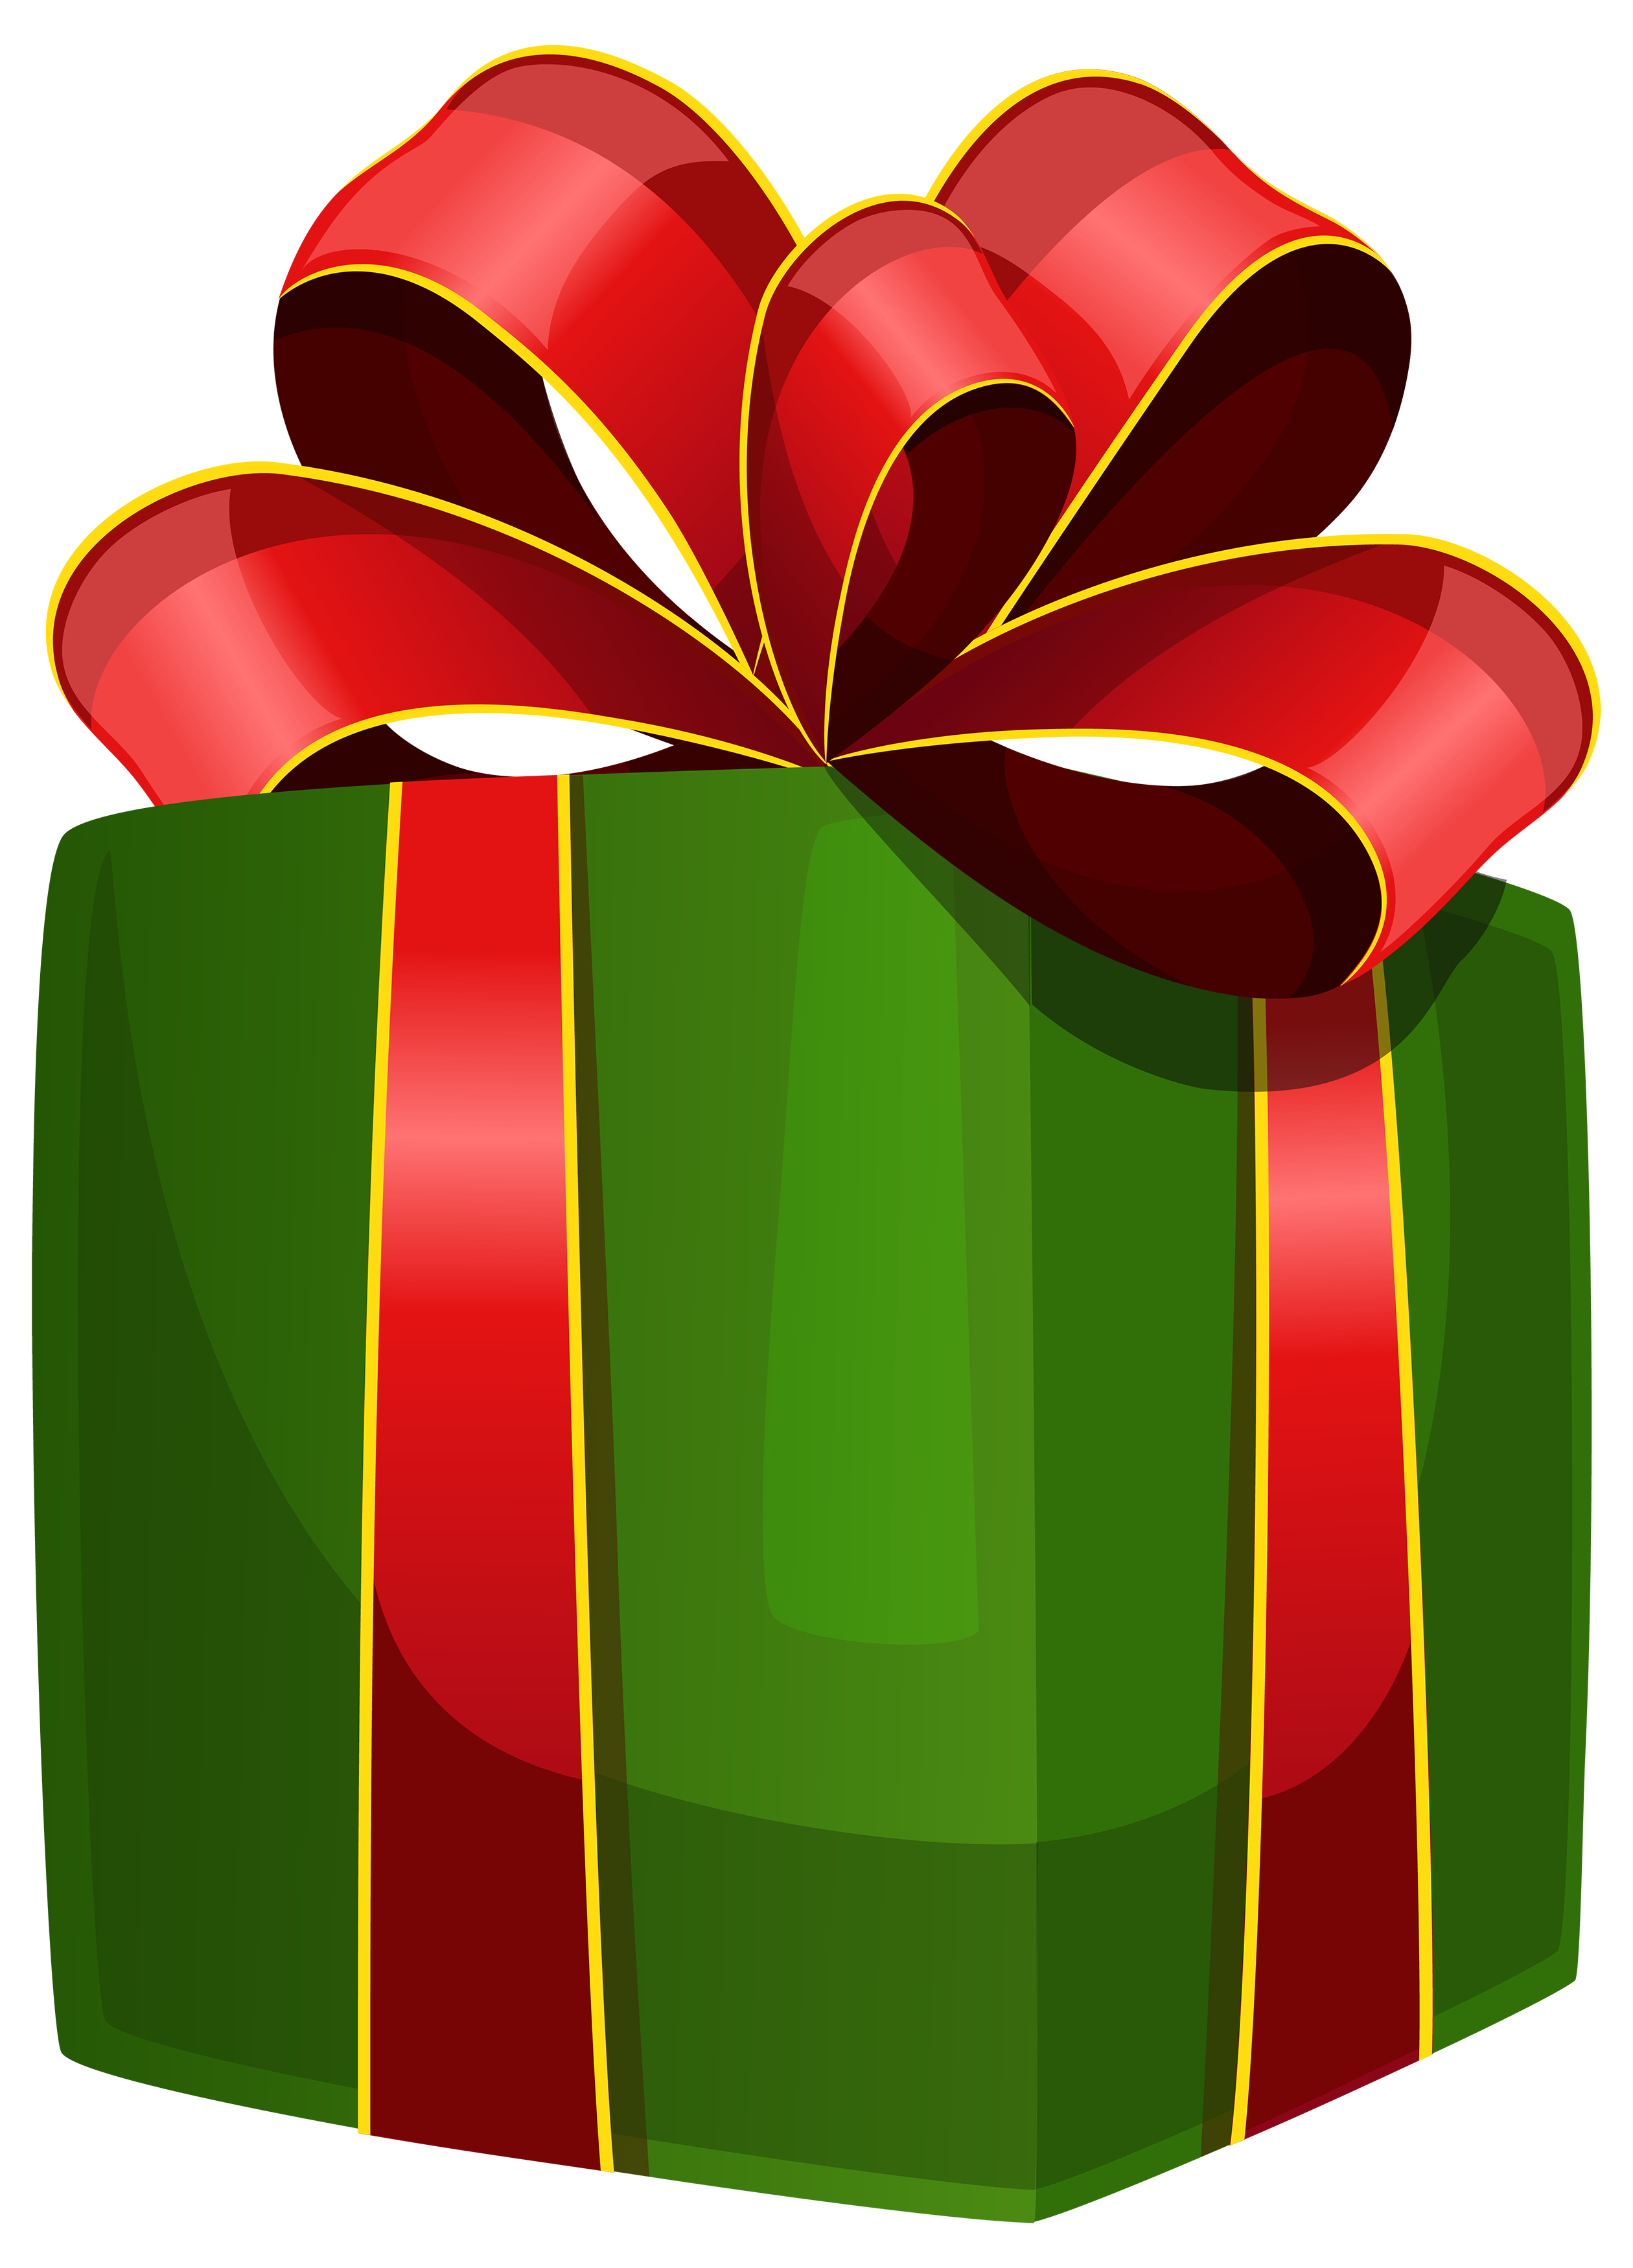 free clipart images gift boxes - photo #46